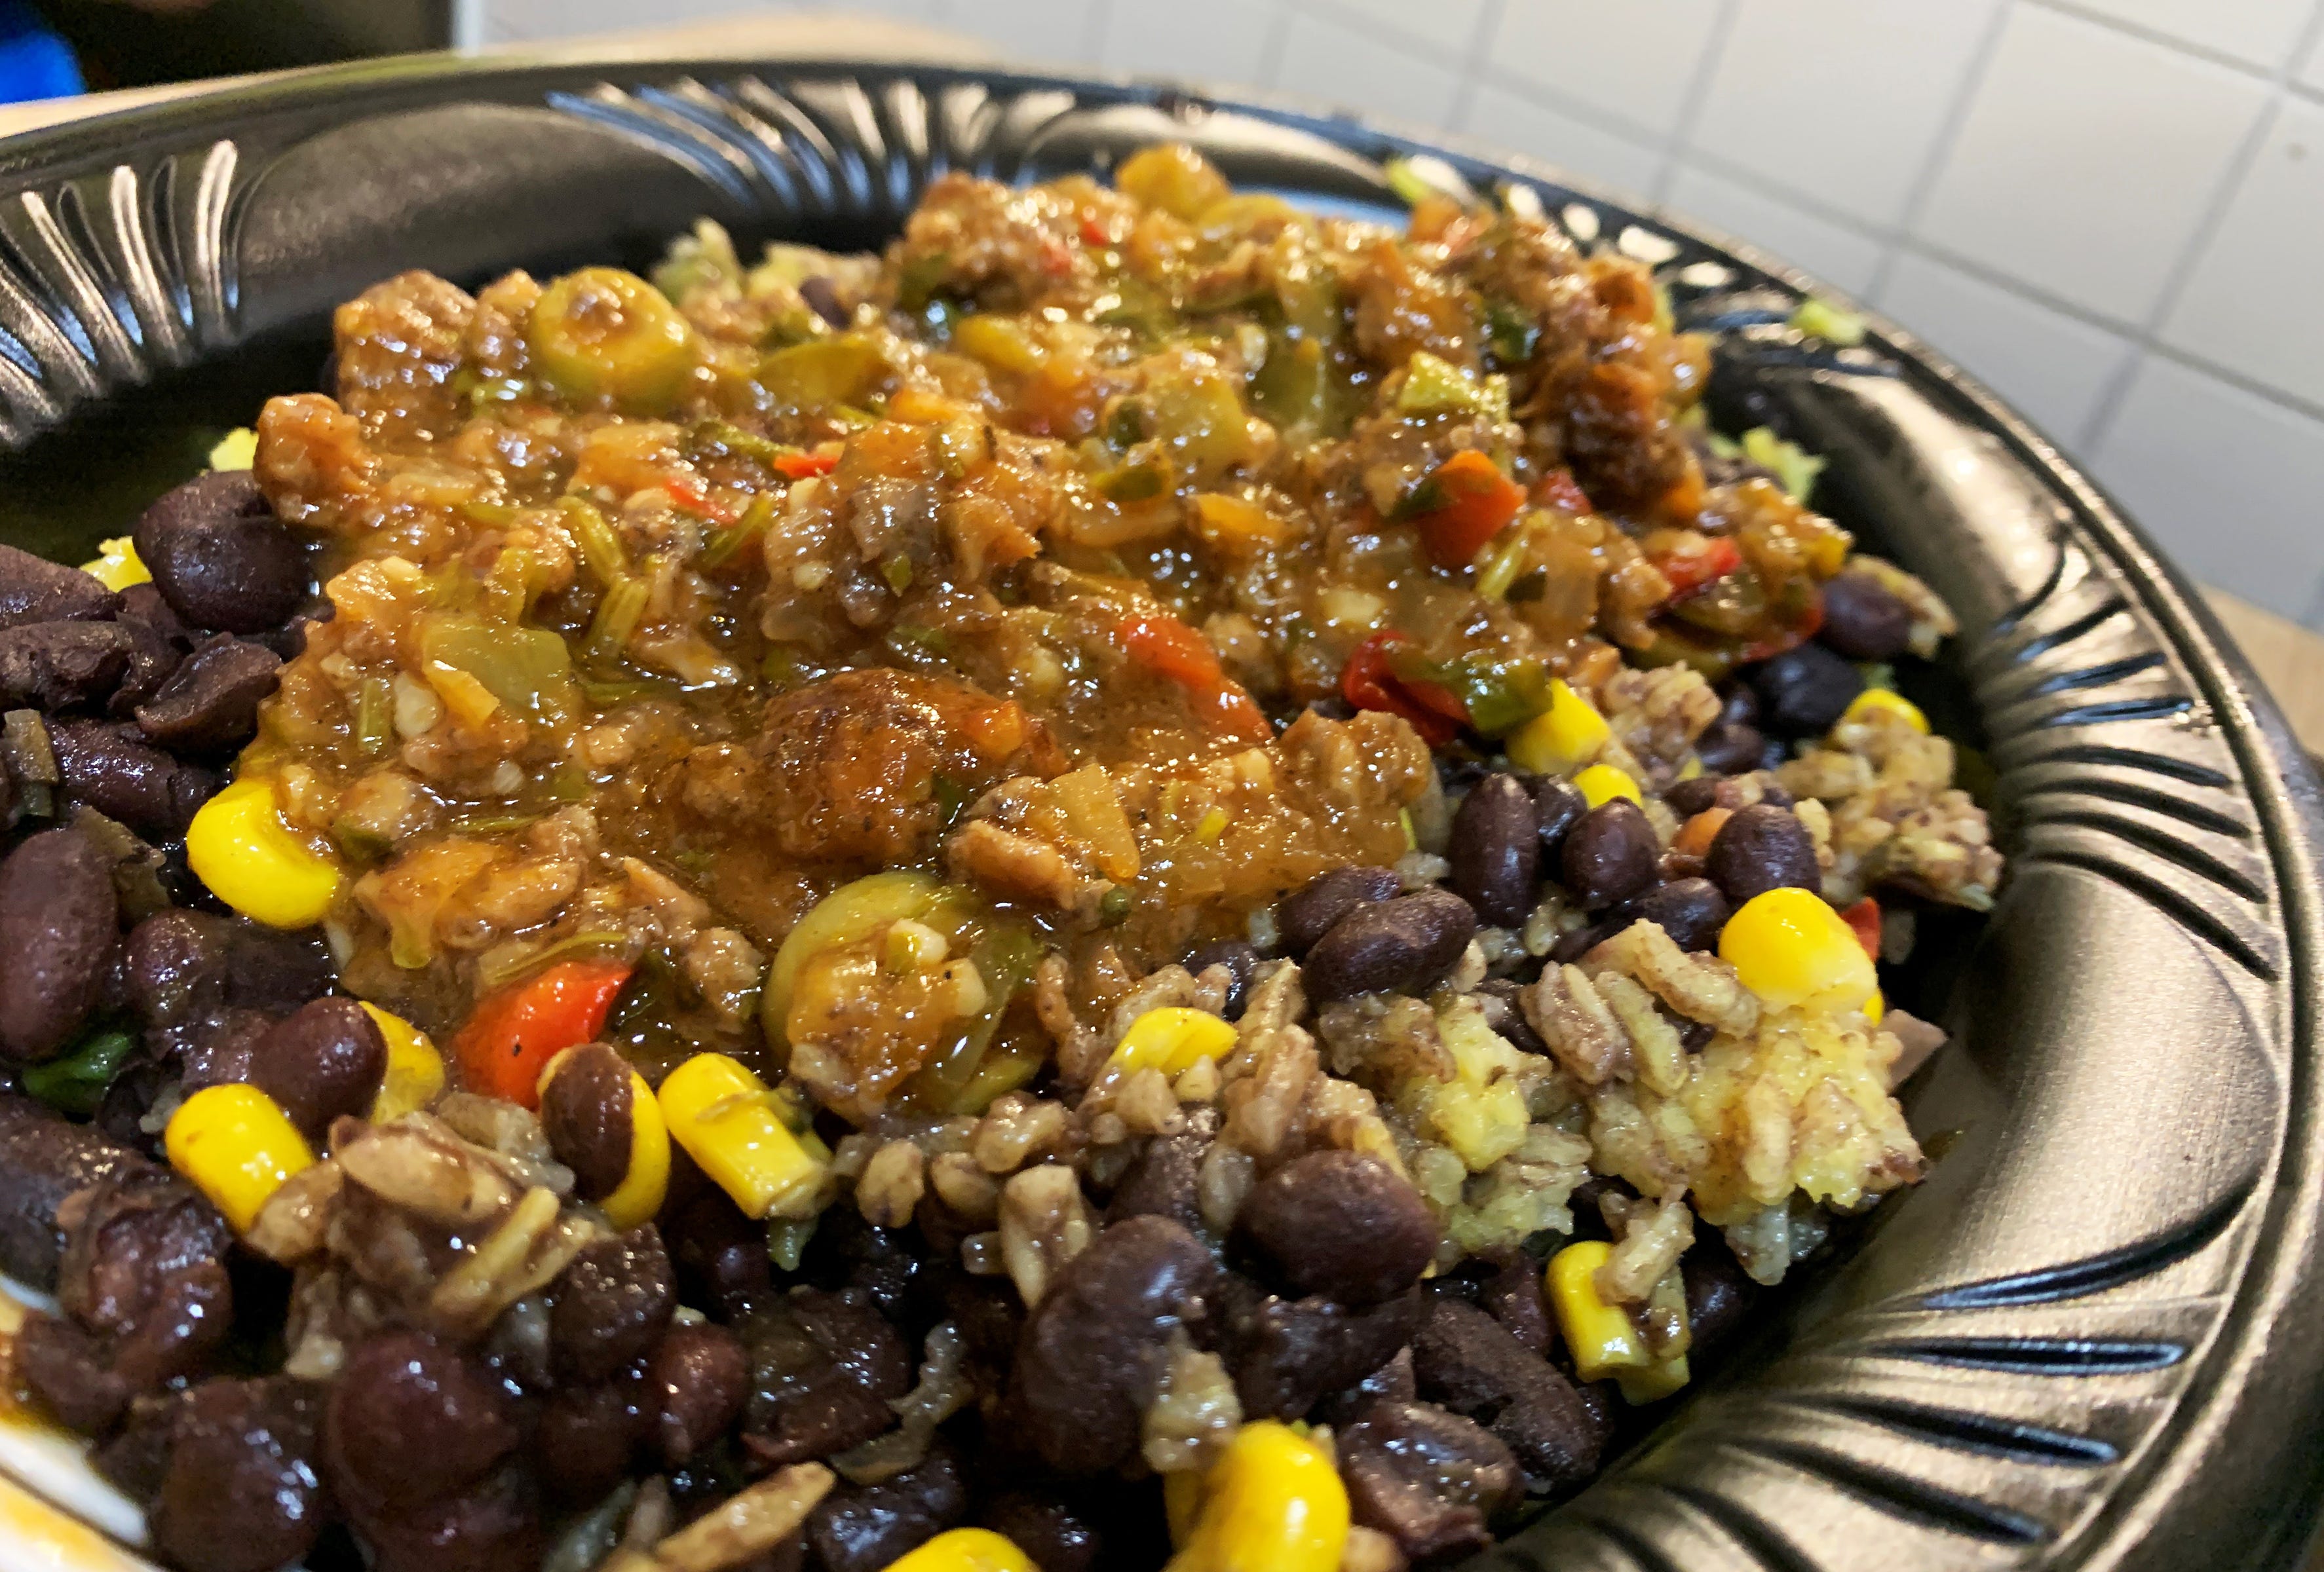 Watts for Dinner: Pollo Tropical goes above and Beyond with new offerings